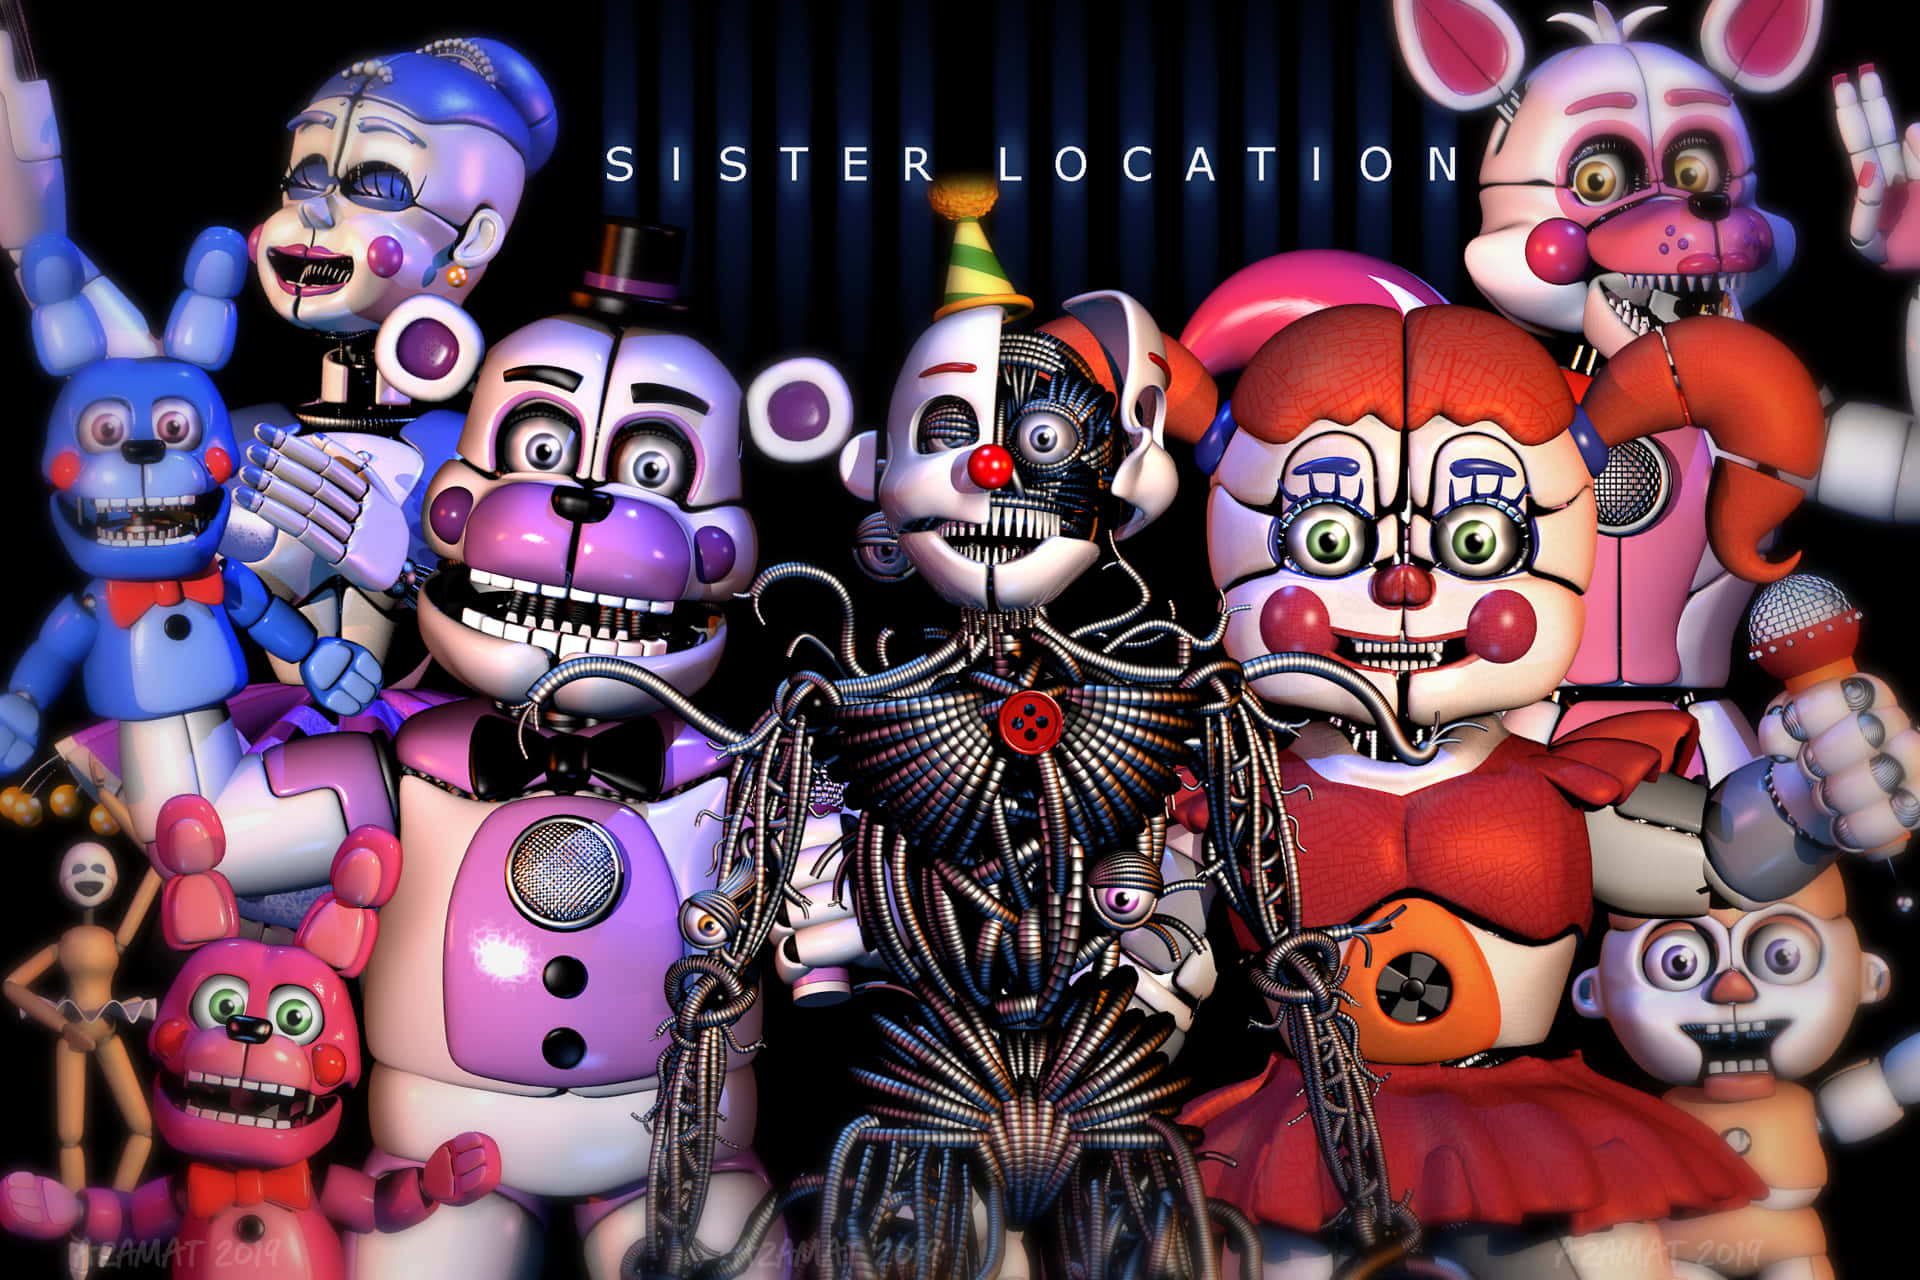 Toysvill FNAF Action Figures Sister Location (Set of 5 pcs), More Than 5  inches [Funtime Freddy Bear, Circus Baby, Ennard, Ballora, Funtime Foxy],  Fun